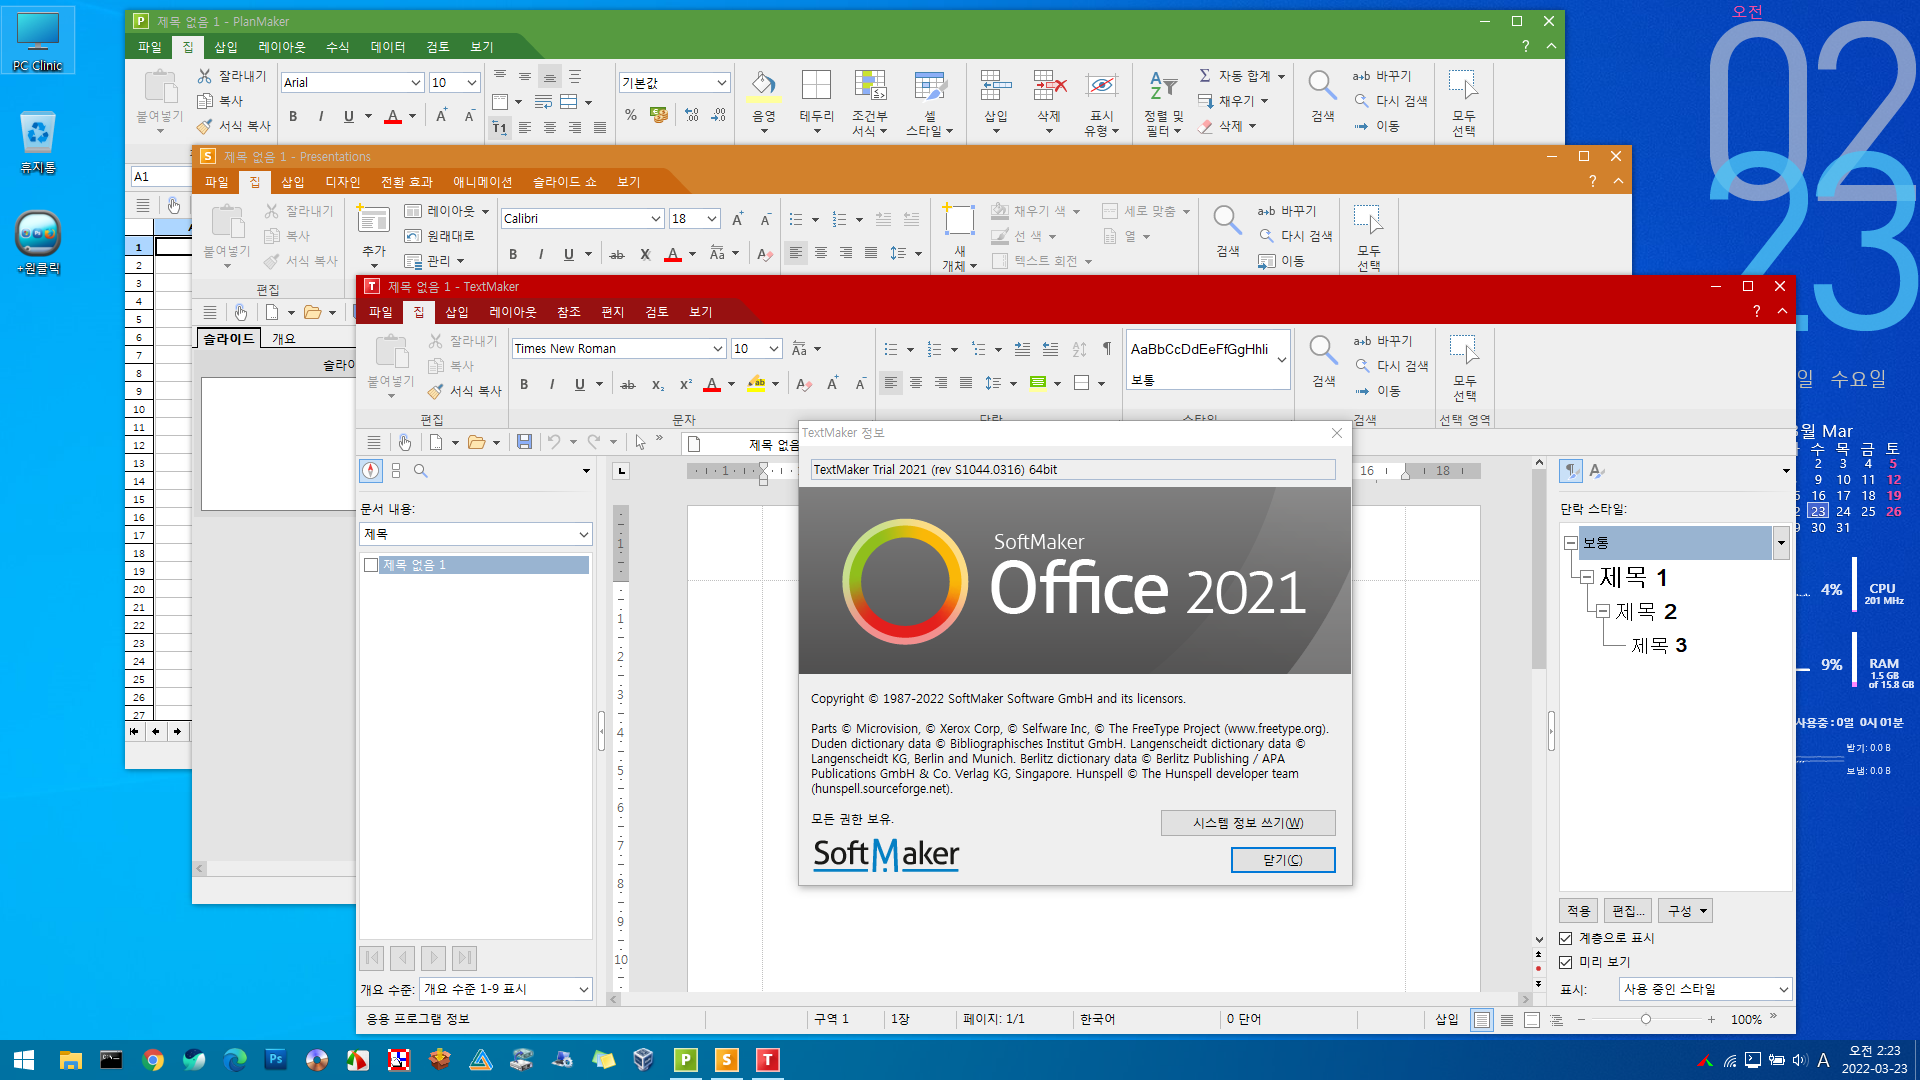 SoftMaker Office Professional 2021 rev.1066.0605 download the last version for iphone